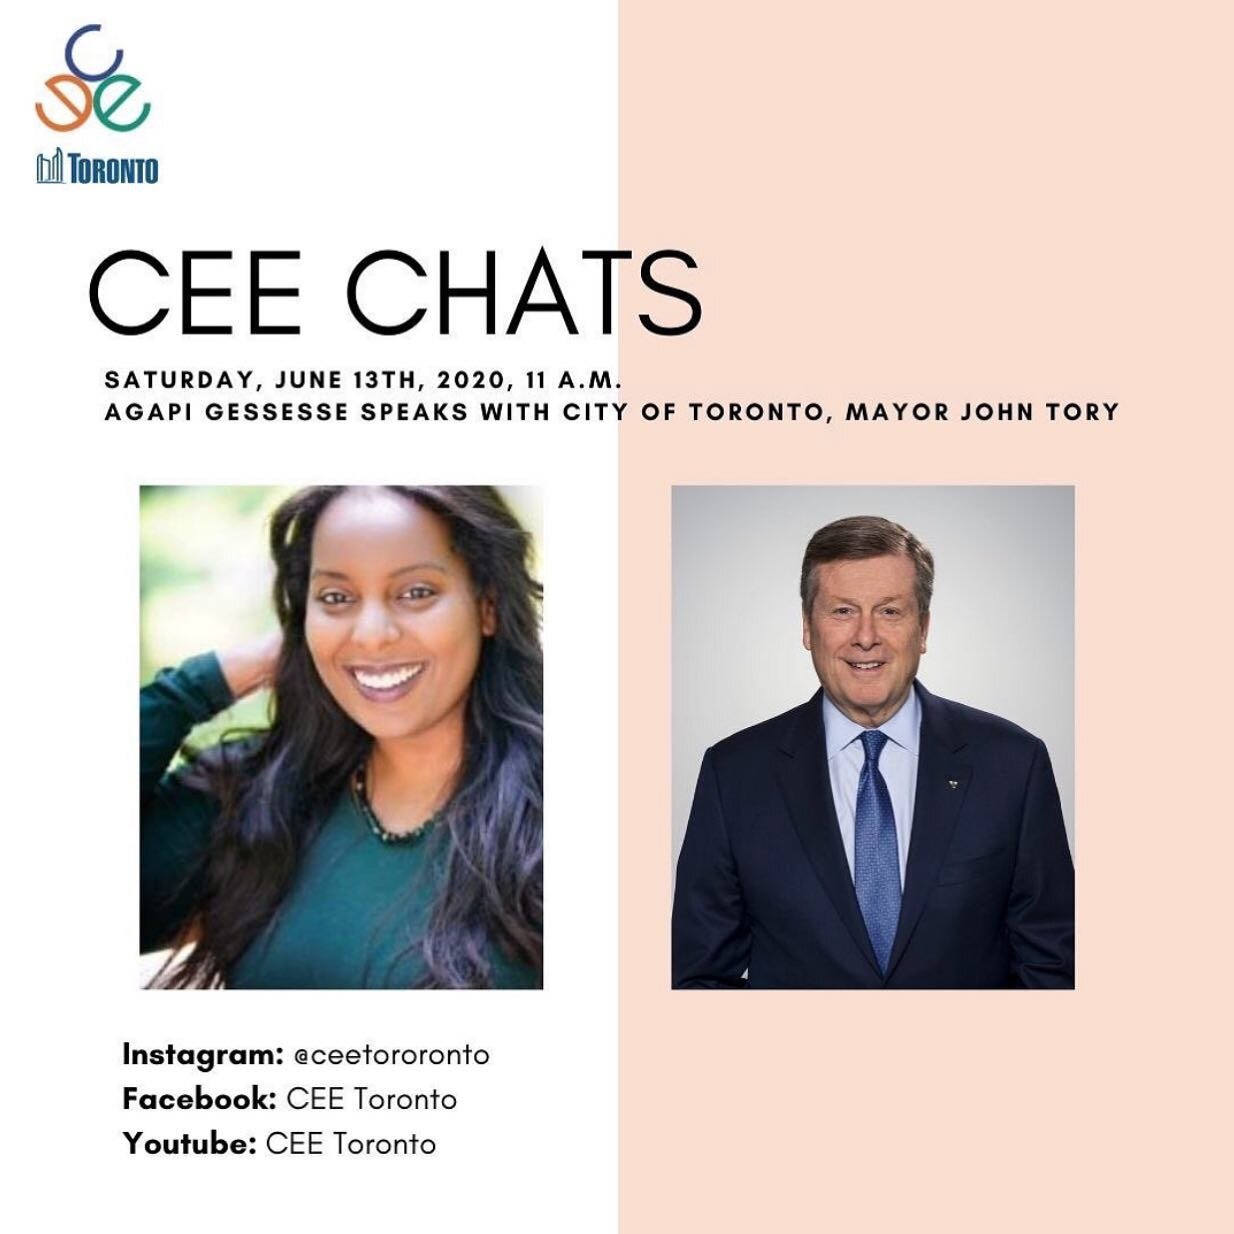 Join us for a conversation with The Mayor of our great city of Toronto John Tory, Saturday at 11am on @ceetoronto live!